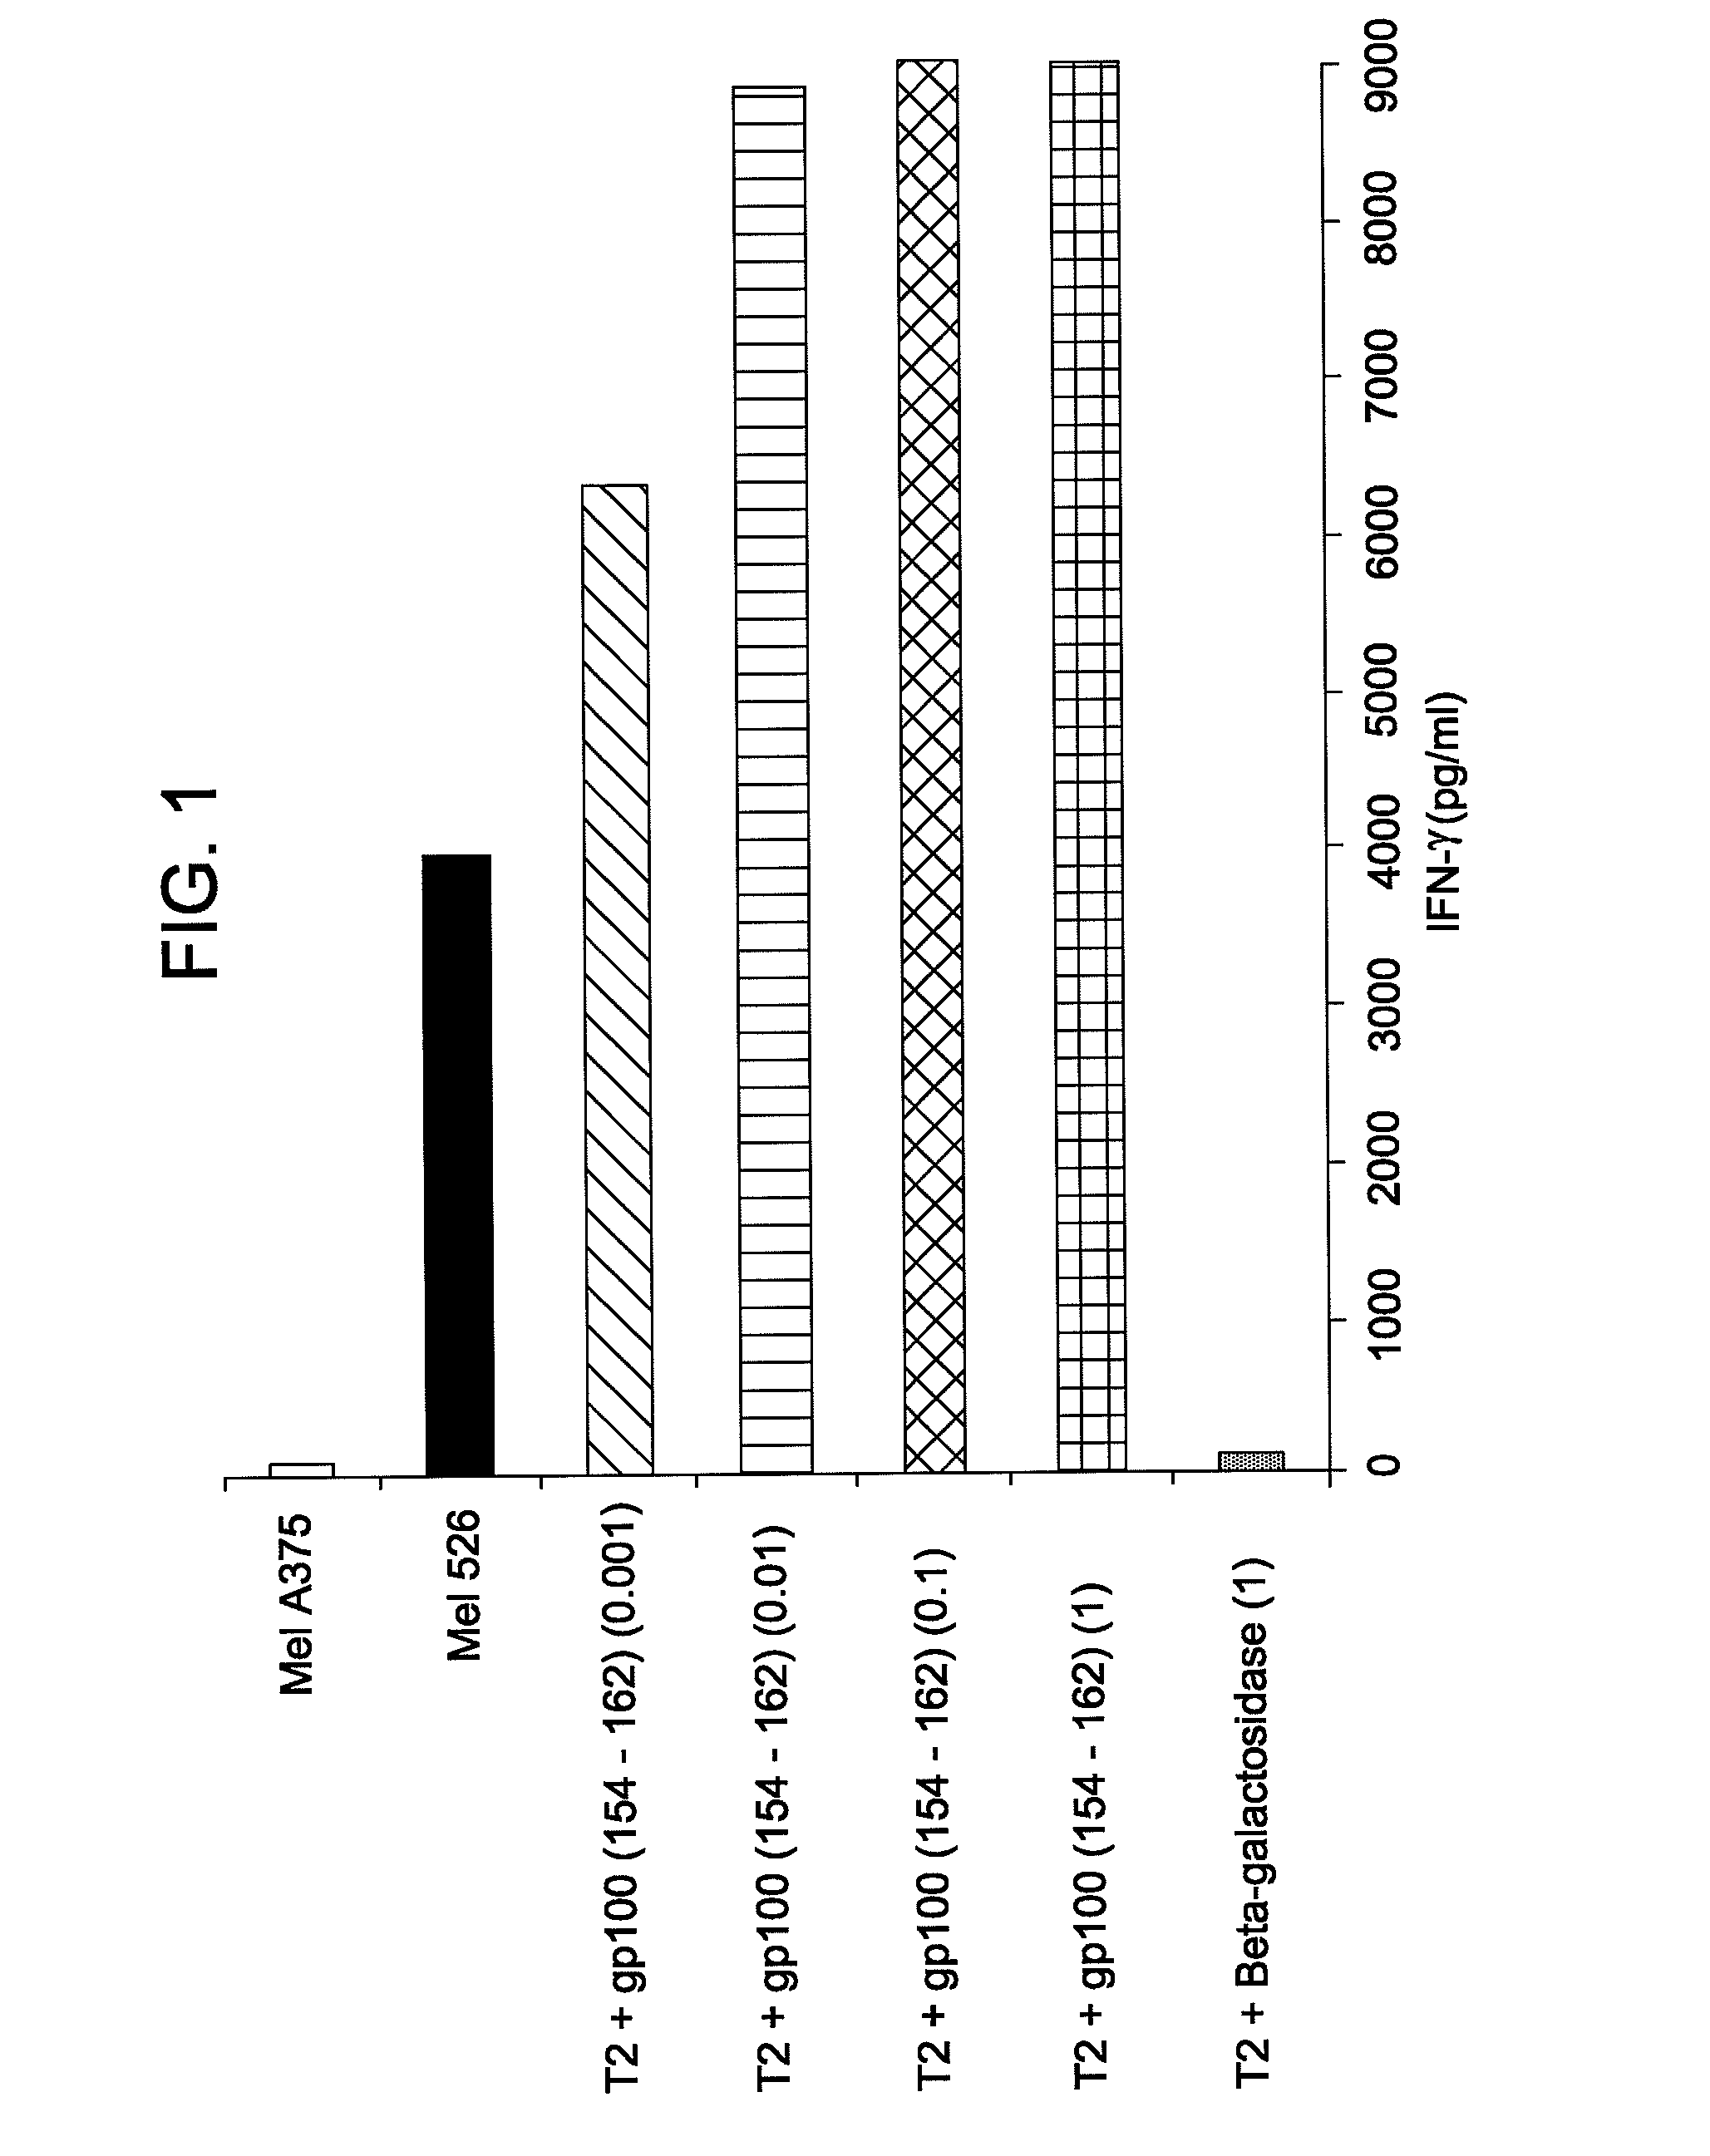 GP100-specific T cell receptors and related materials and methods of use